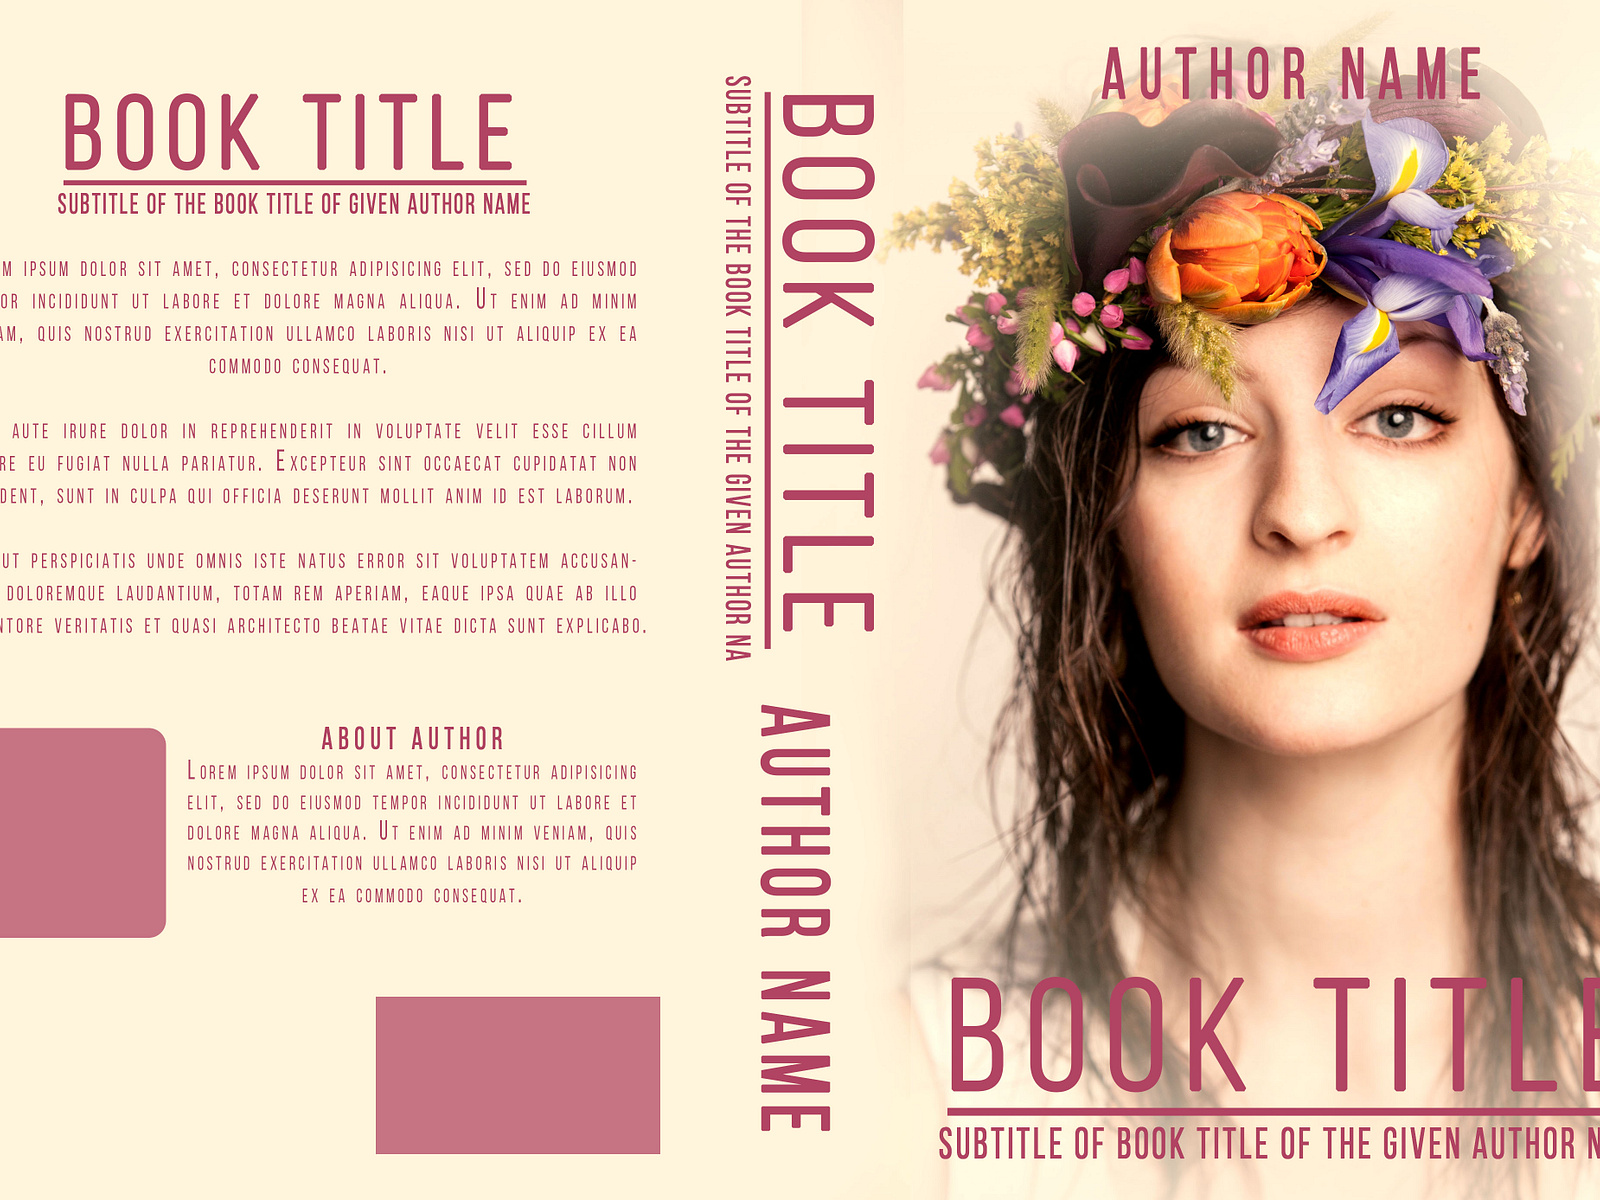 Paperback Book Cover Design Art by Shumaila Rehman on Dribbble